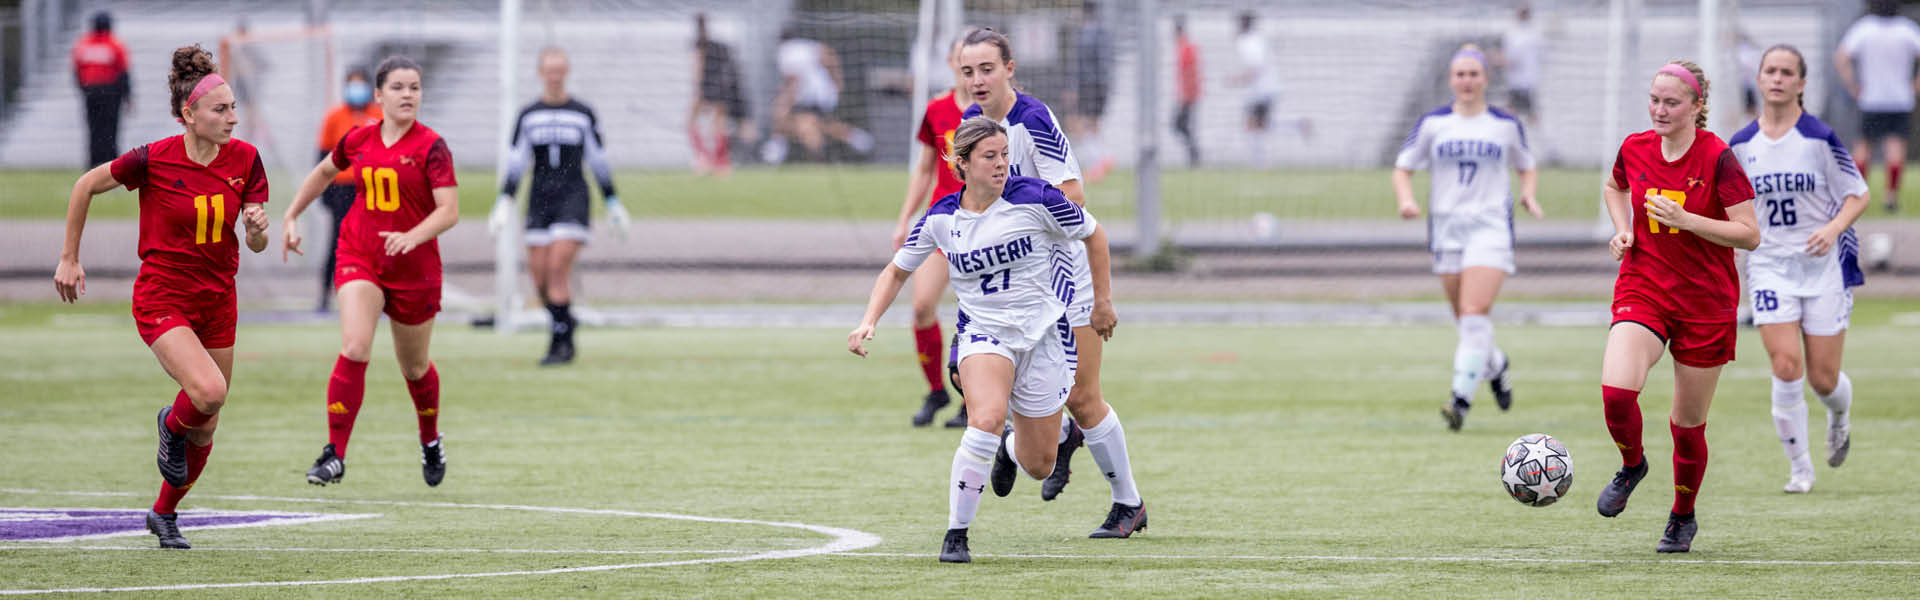 Women’s soccer game featuring the Western Mustangs